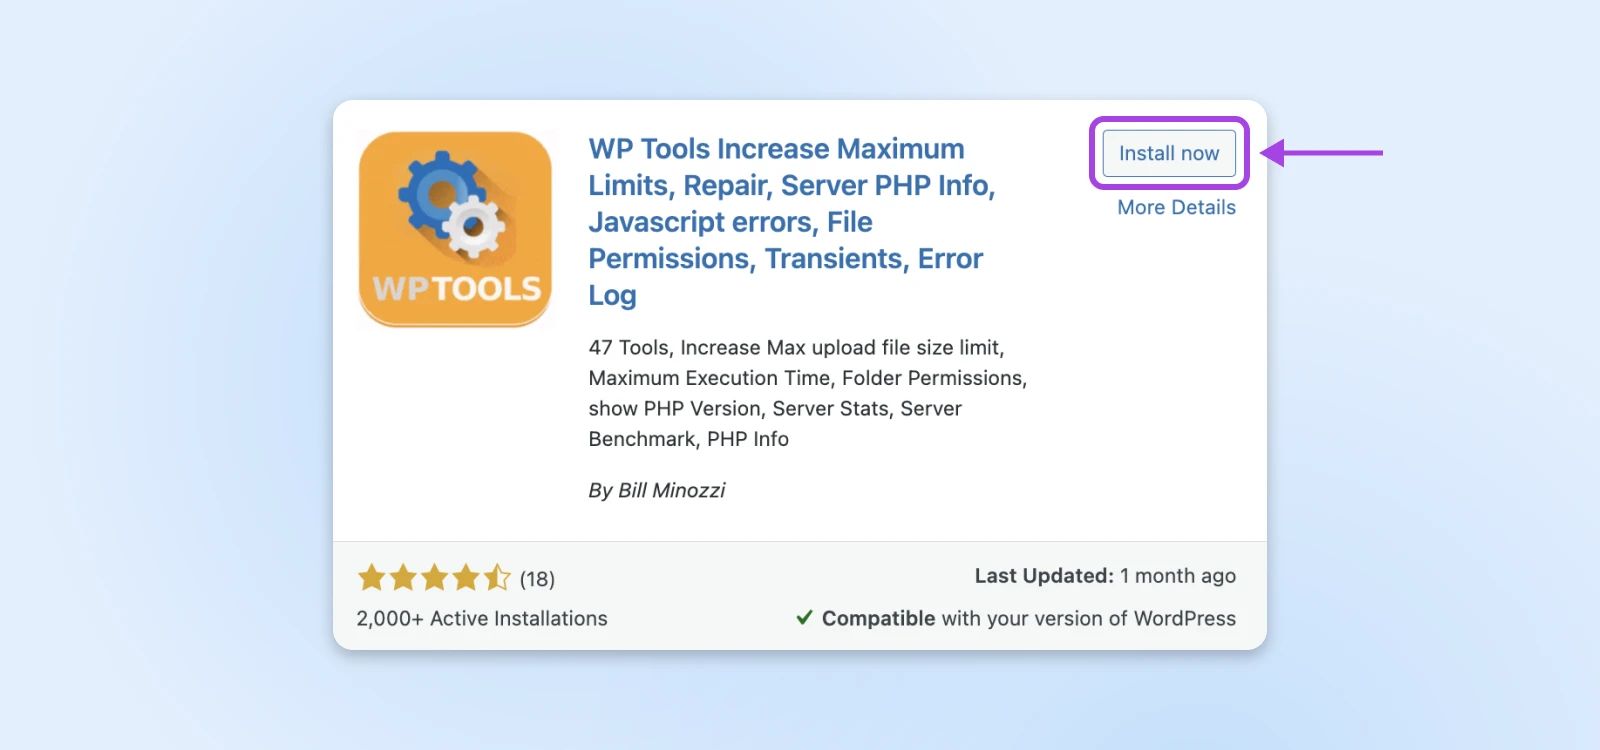 WP Tools plugin dialog box featuring reviews, last update, compatibility check, and Install now and More Details buttons.